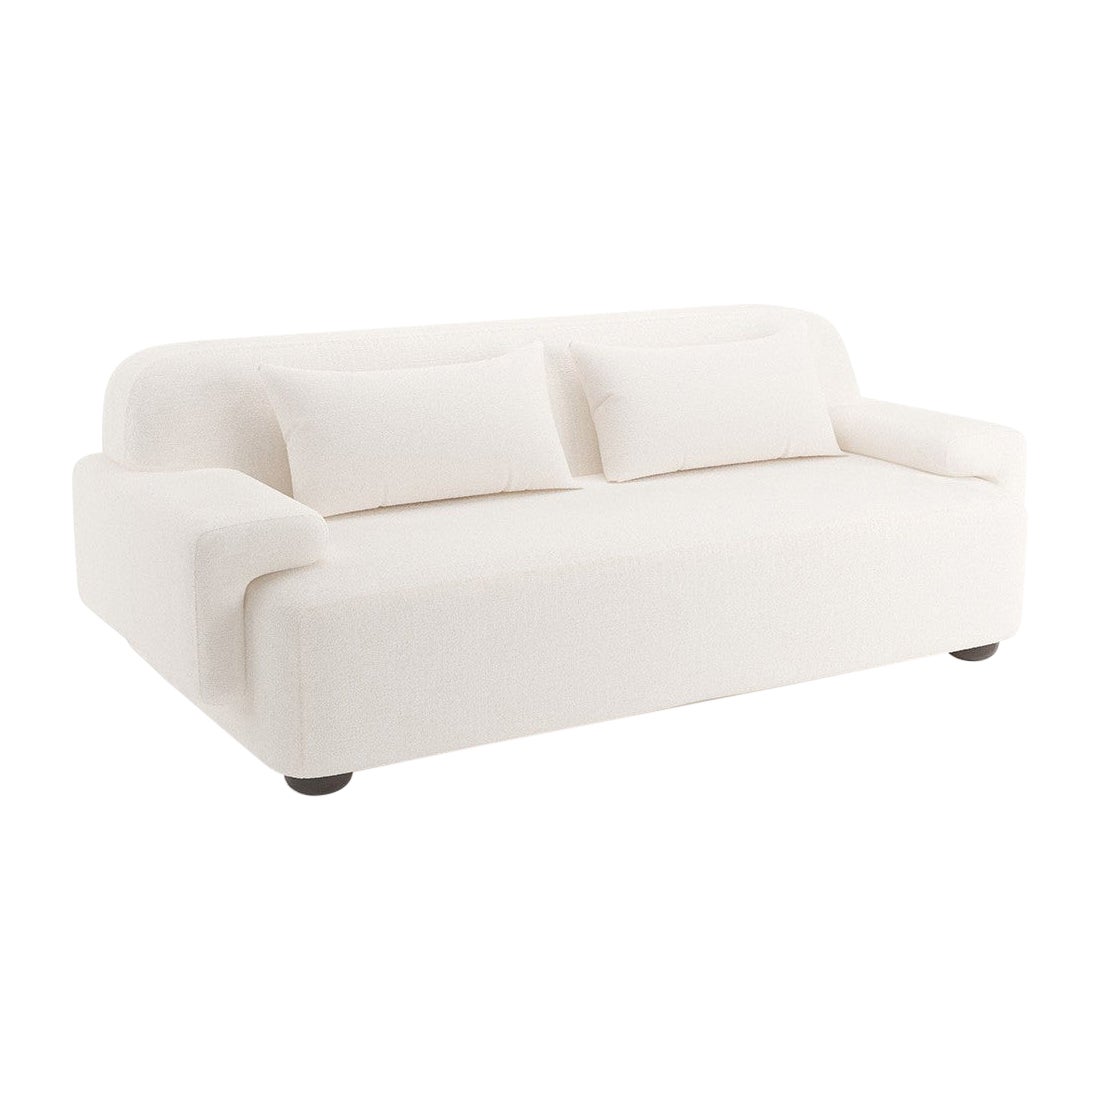 Popus Editions Lena 3 Seater Sofa in Egg Shell Off-White Malmoe Terry Fabric For Sale